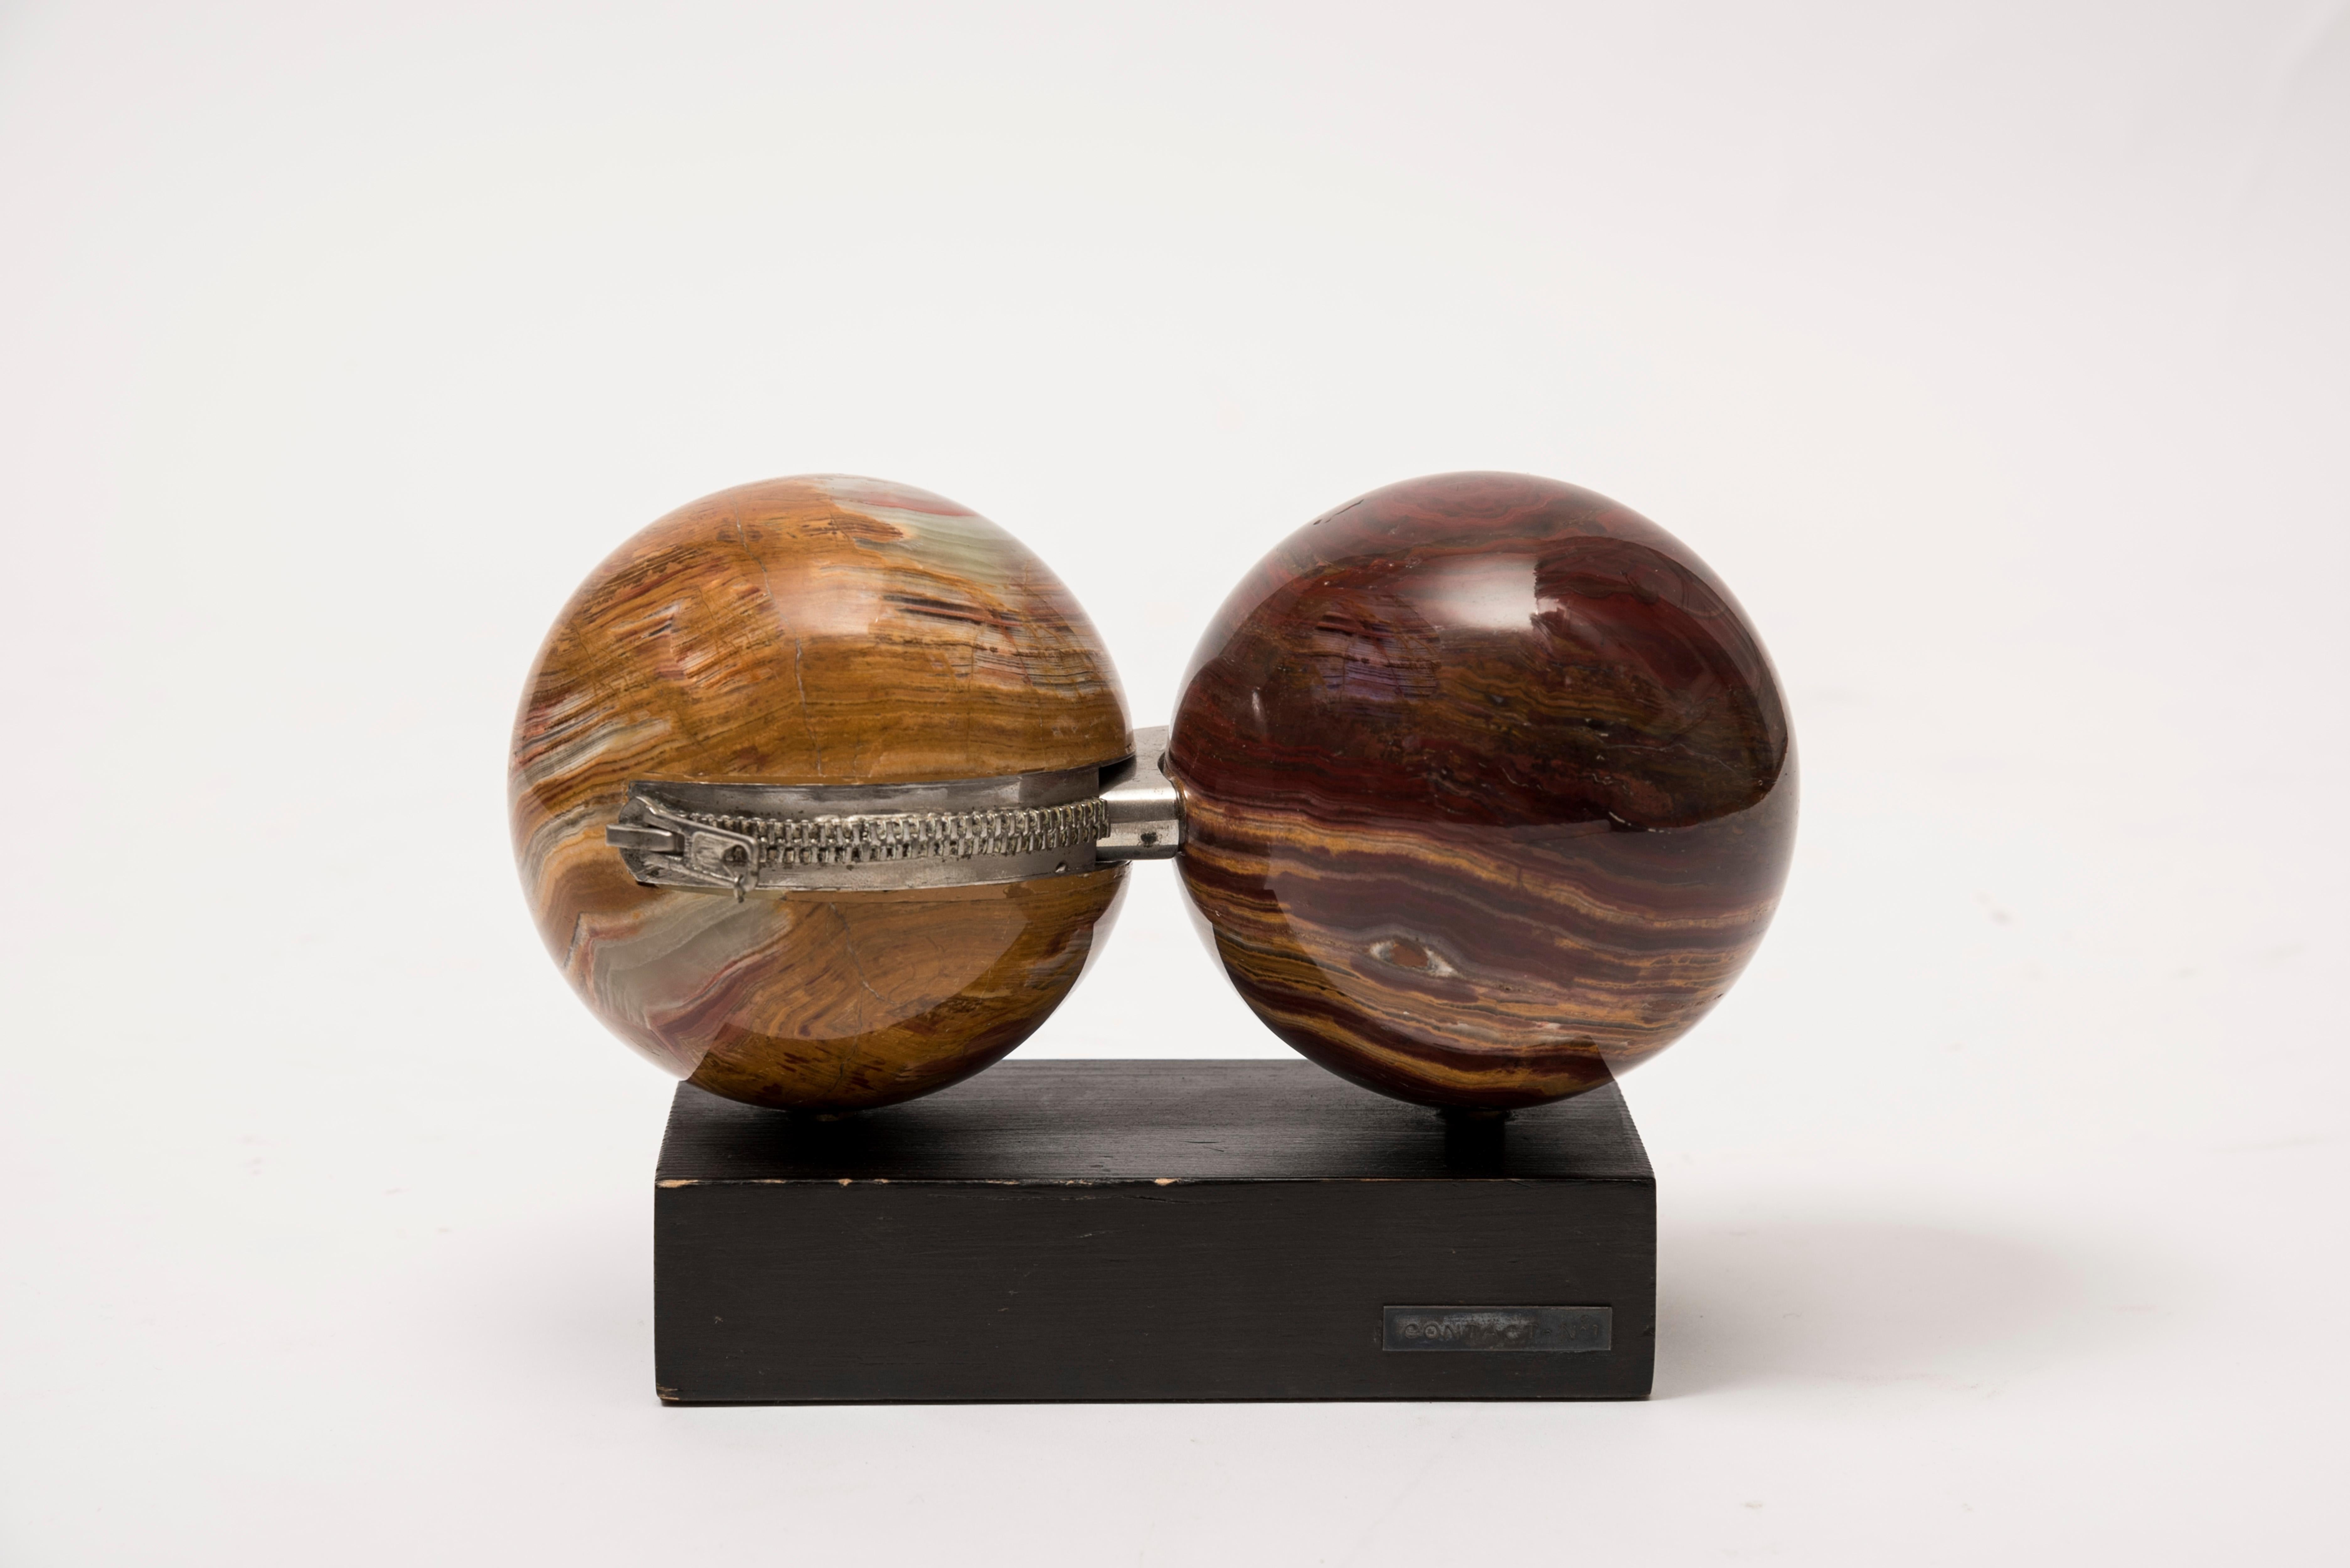 Ultra rare sculpture with two different marble bowls and a metal zipper.
Very nice quality.